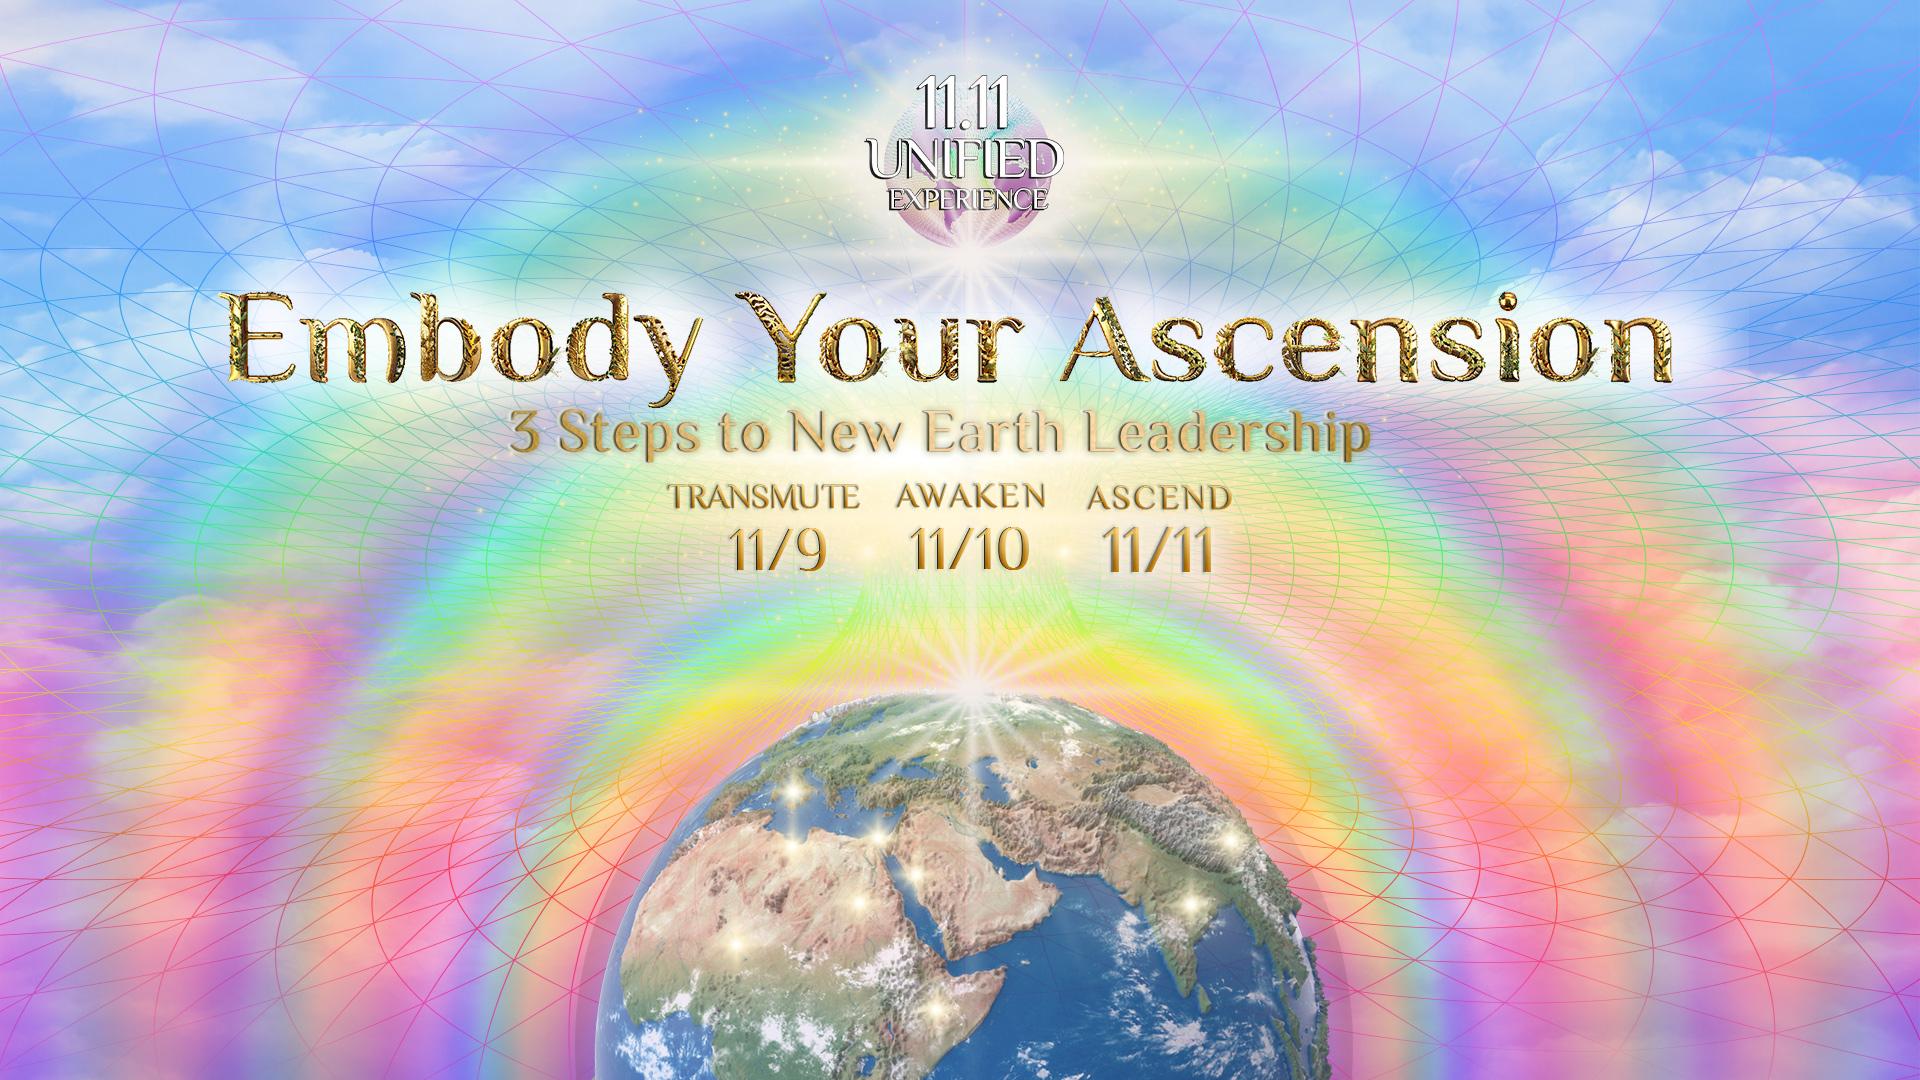 11.11 Unified Virtual Experience: Embody Your Ascension